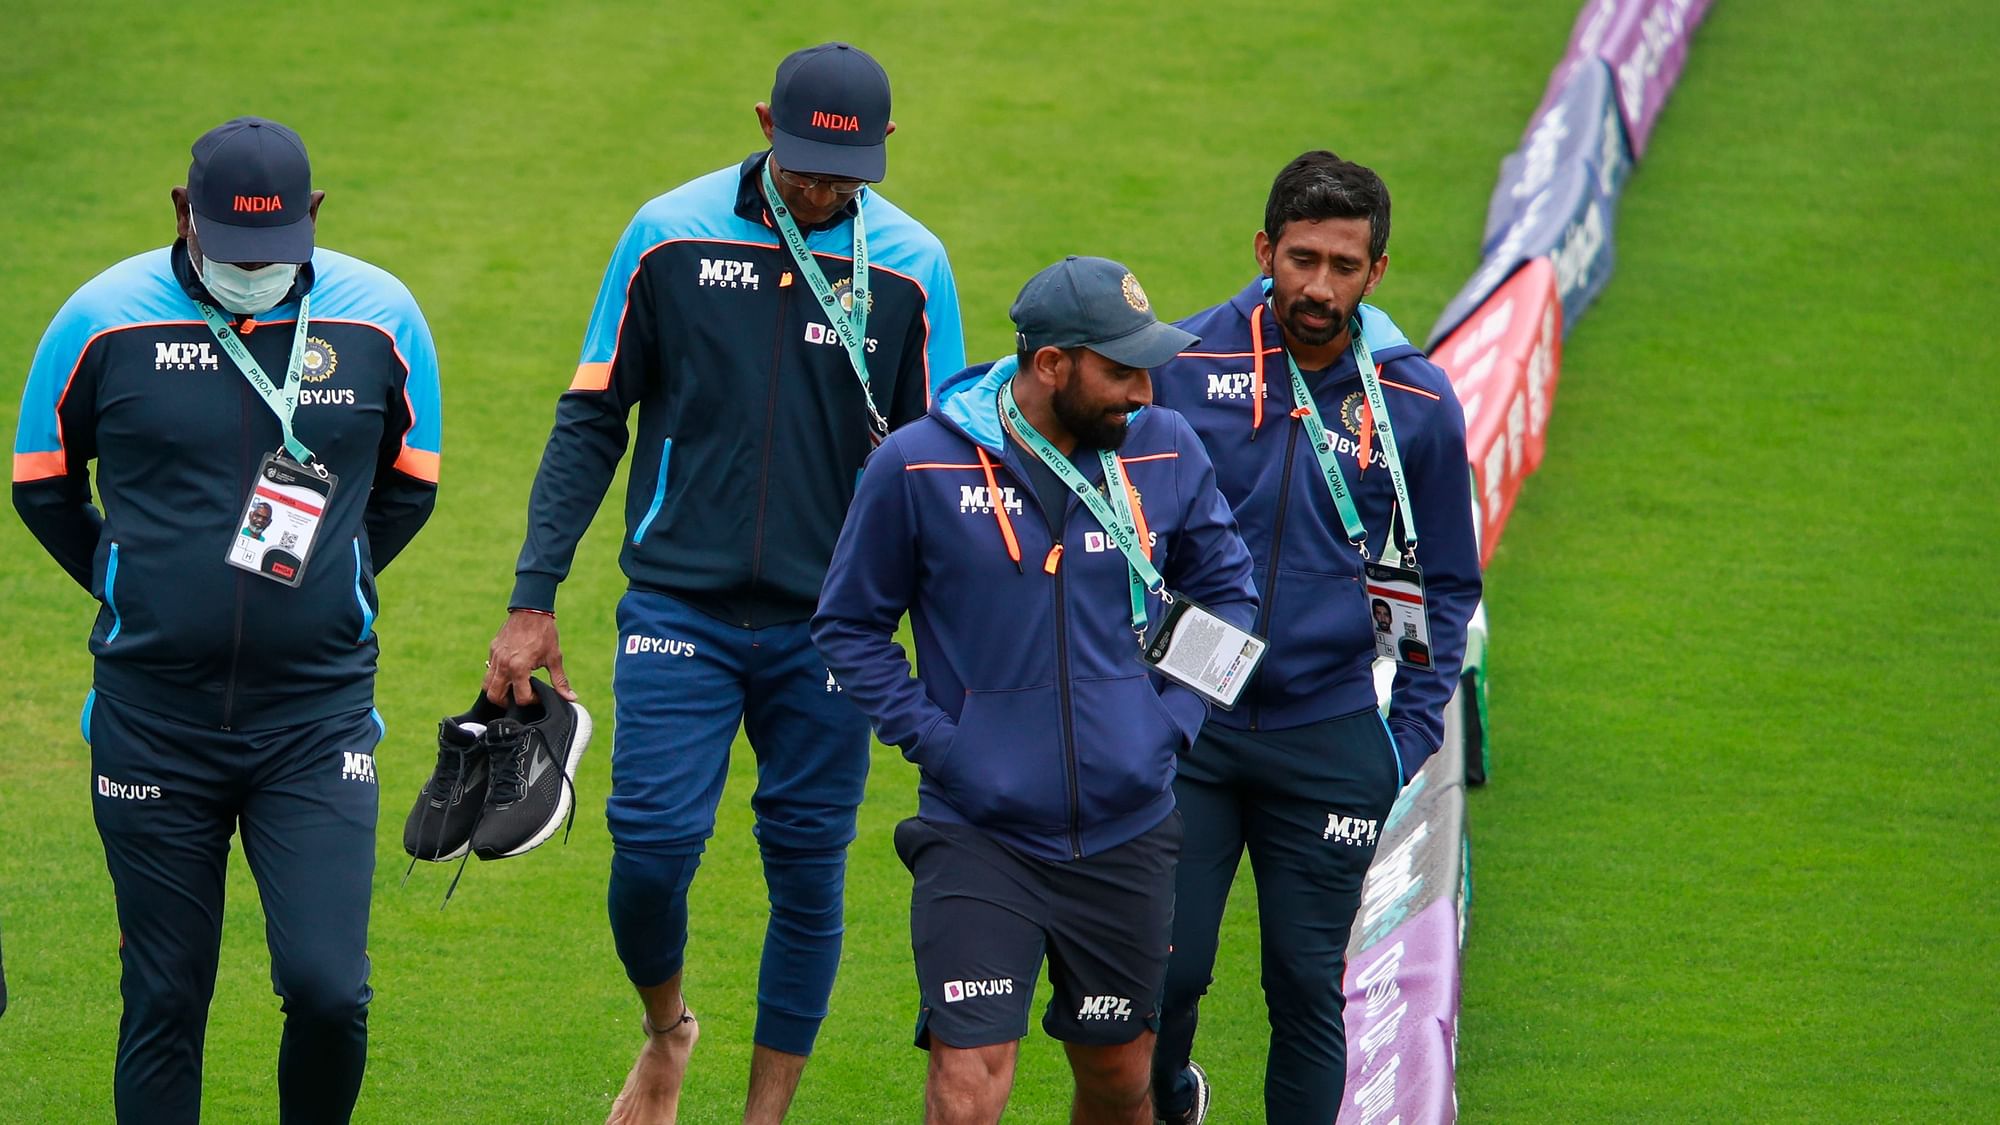 India vs NZ WTC Final: The ICC had made provisions for a ‘Reserve Day’ if play was disrupted during the five days of the WTC Final.